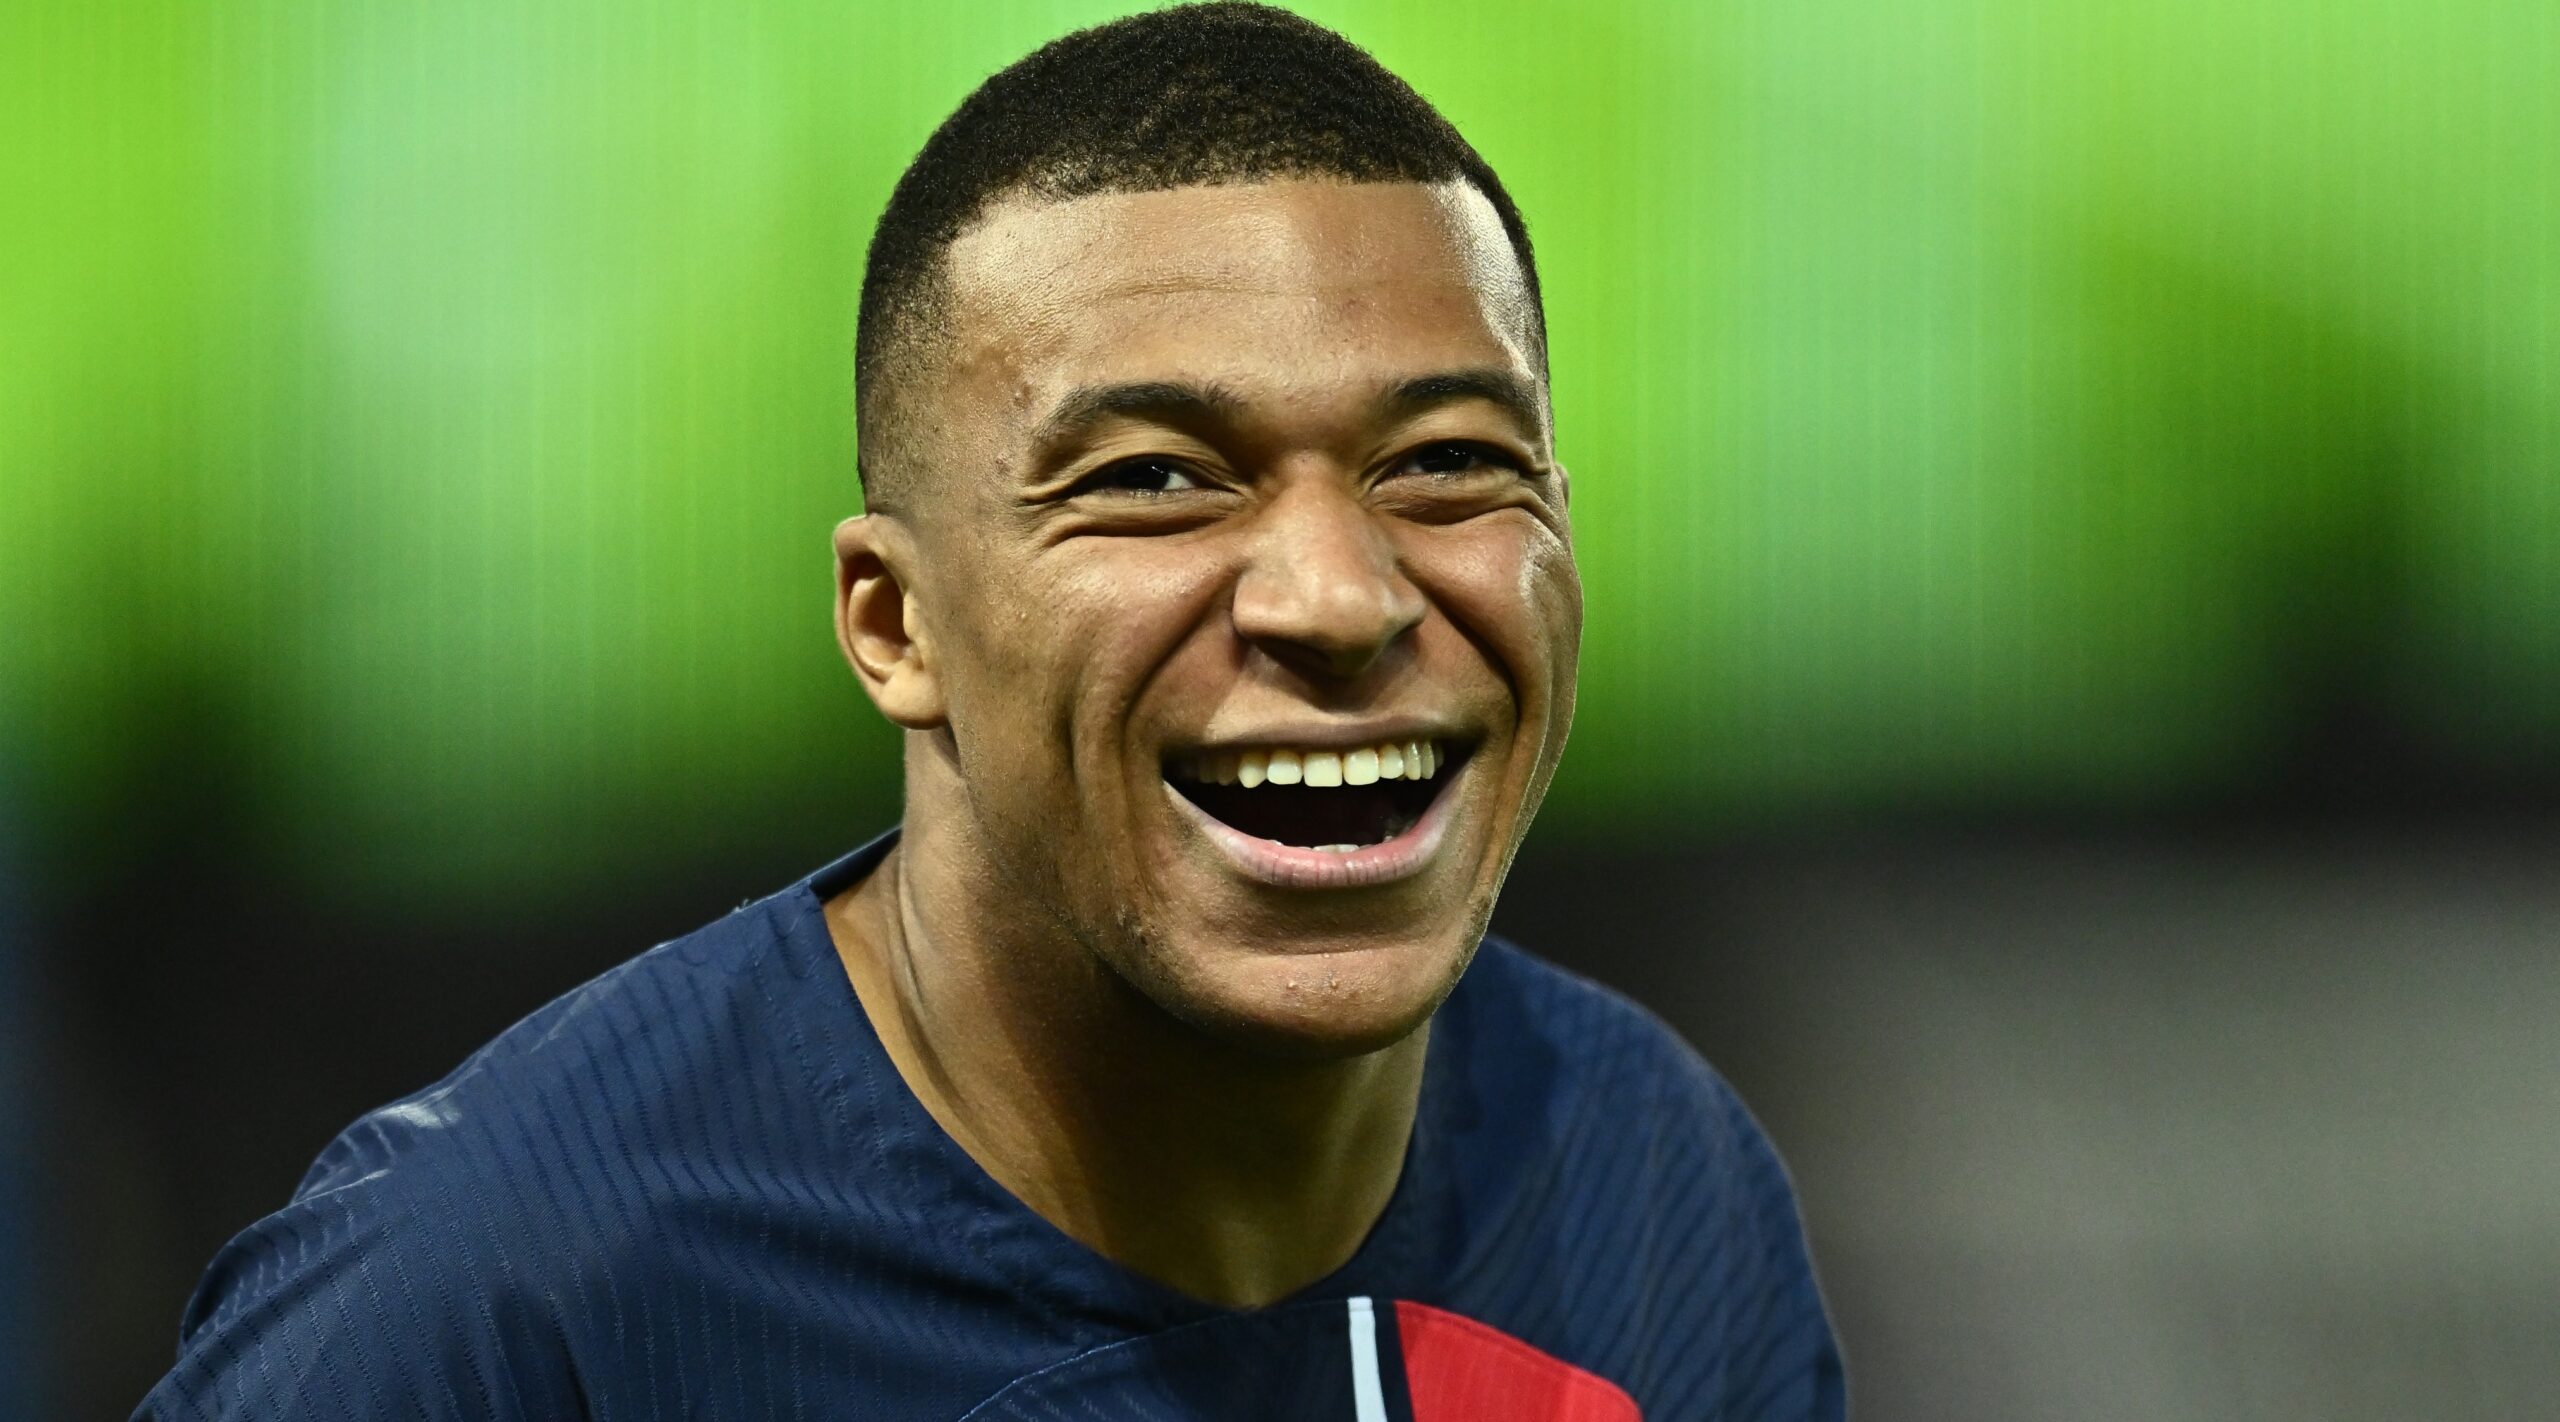 Chelsea chasing Mbappe as PSG look to offload superstar amid Real Madrid interest